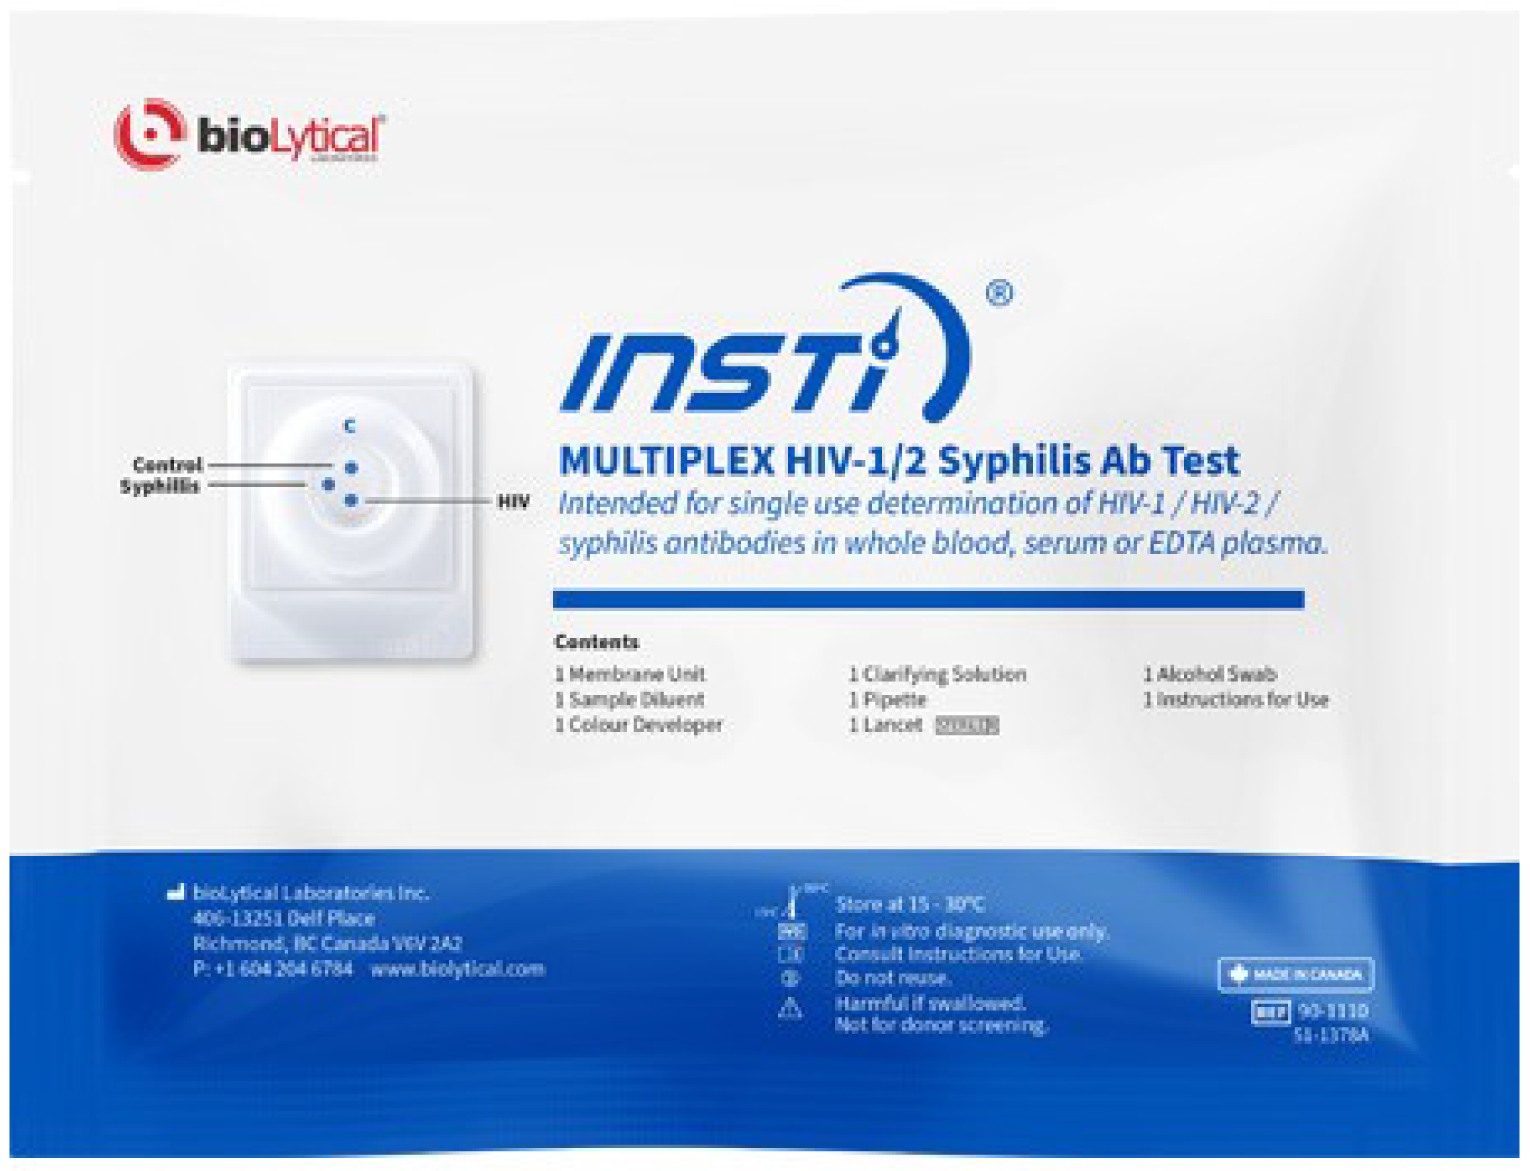 Alt text: Blue and white outer packaging of the INSTI Multiplex HIV/Syphilis point of care test intended for single use determination of HIV and syphilis antibodies in whole blood, serum, or EDTA plasma.